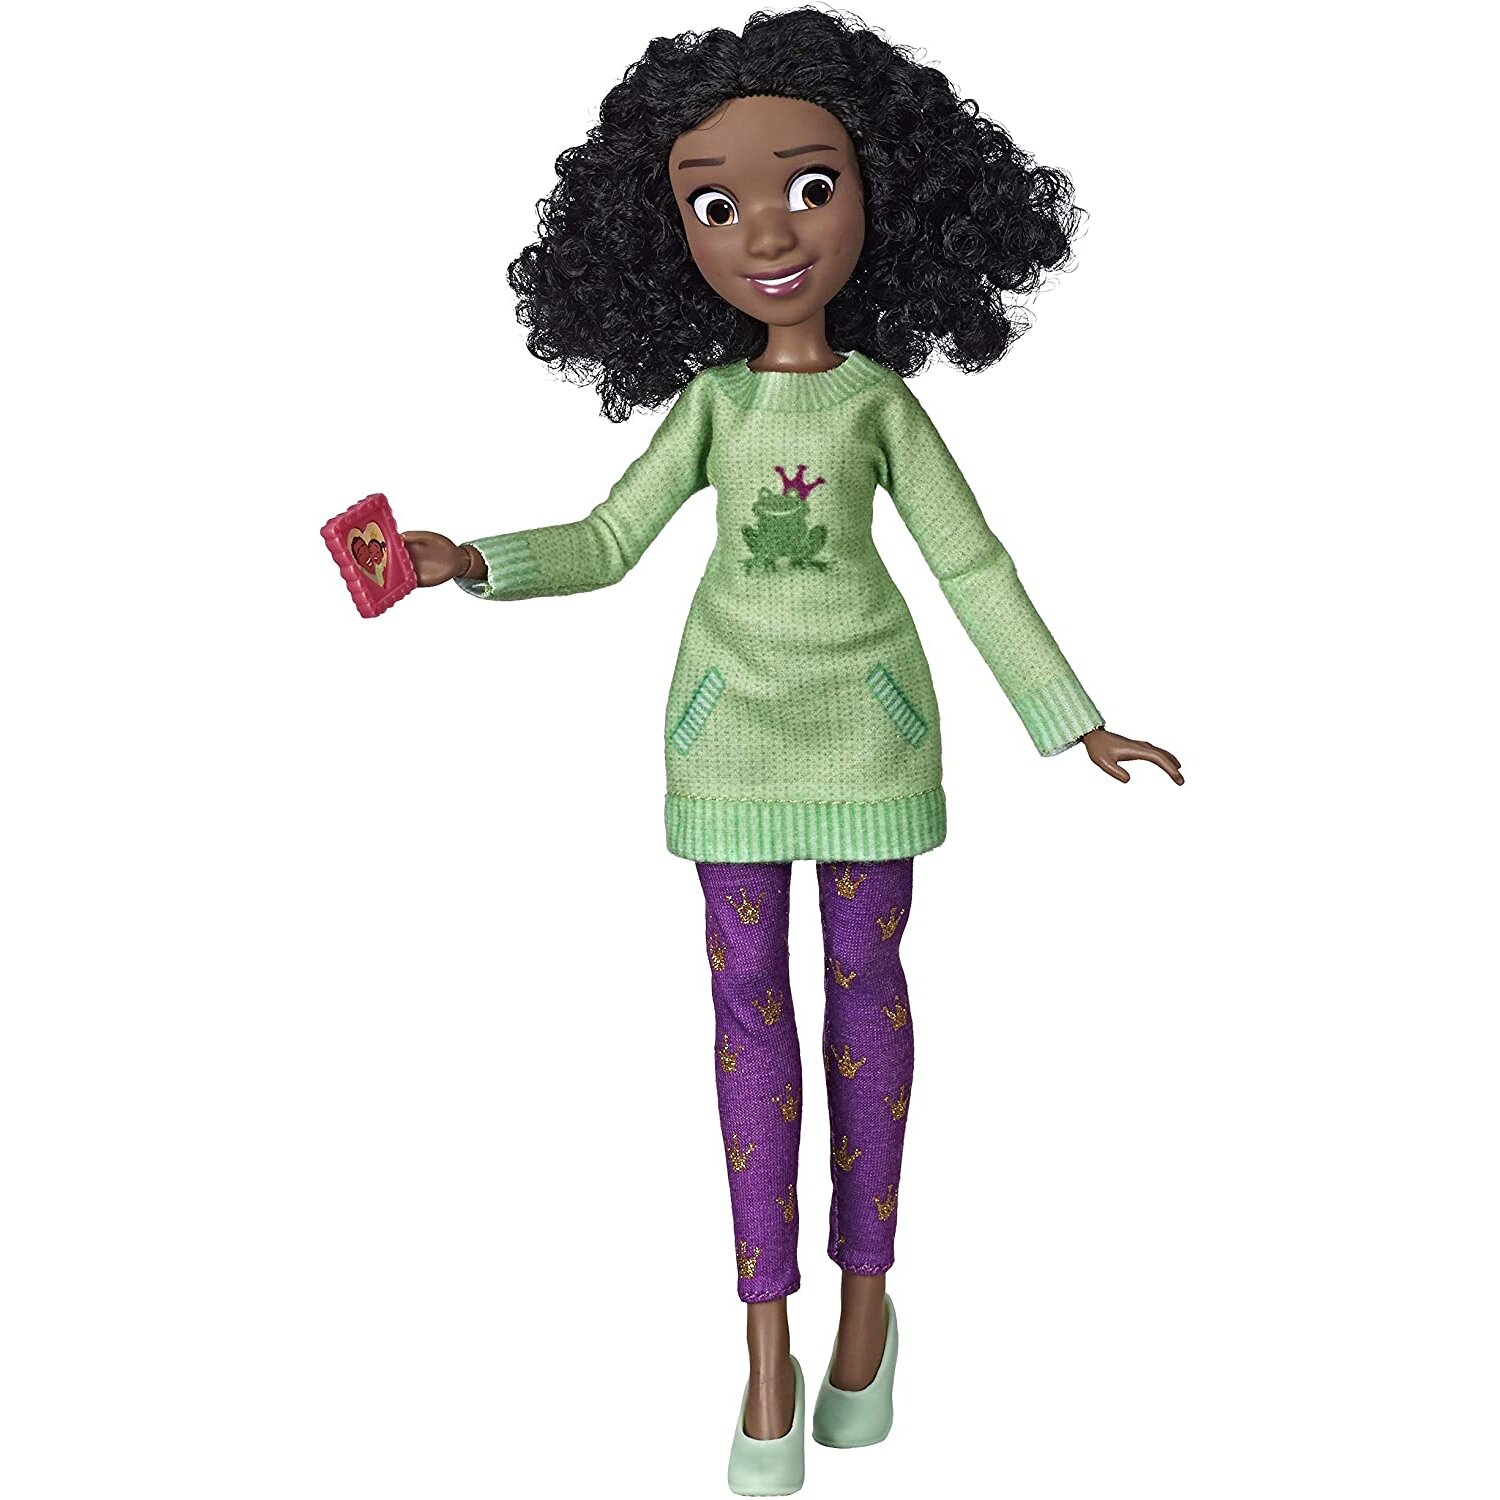 Disney Princess Comfy Squad Tiana, Ralph Breaks the Internet Movie Doll with Comfy Clothes and Accessories